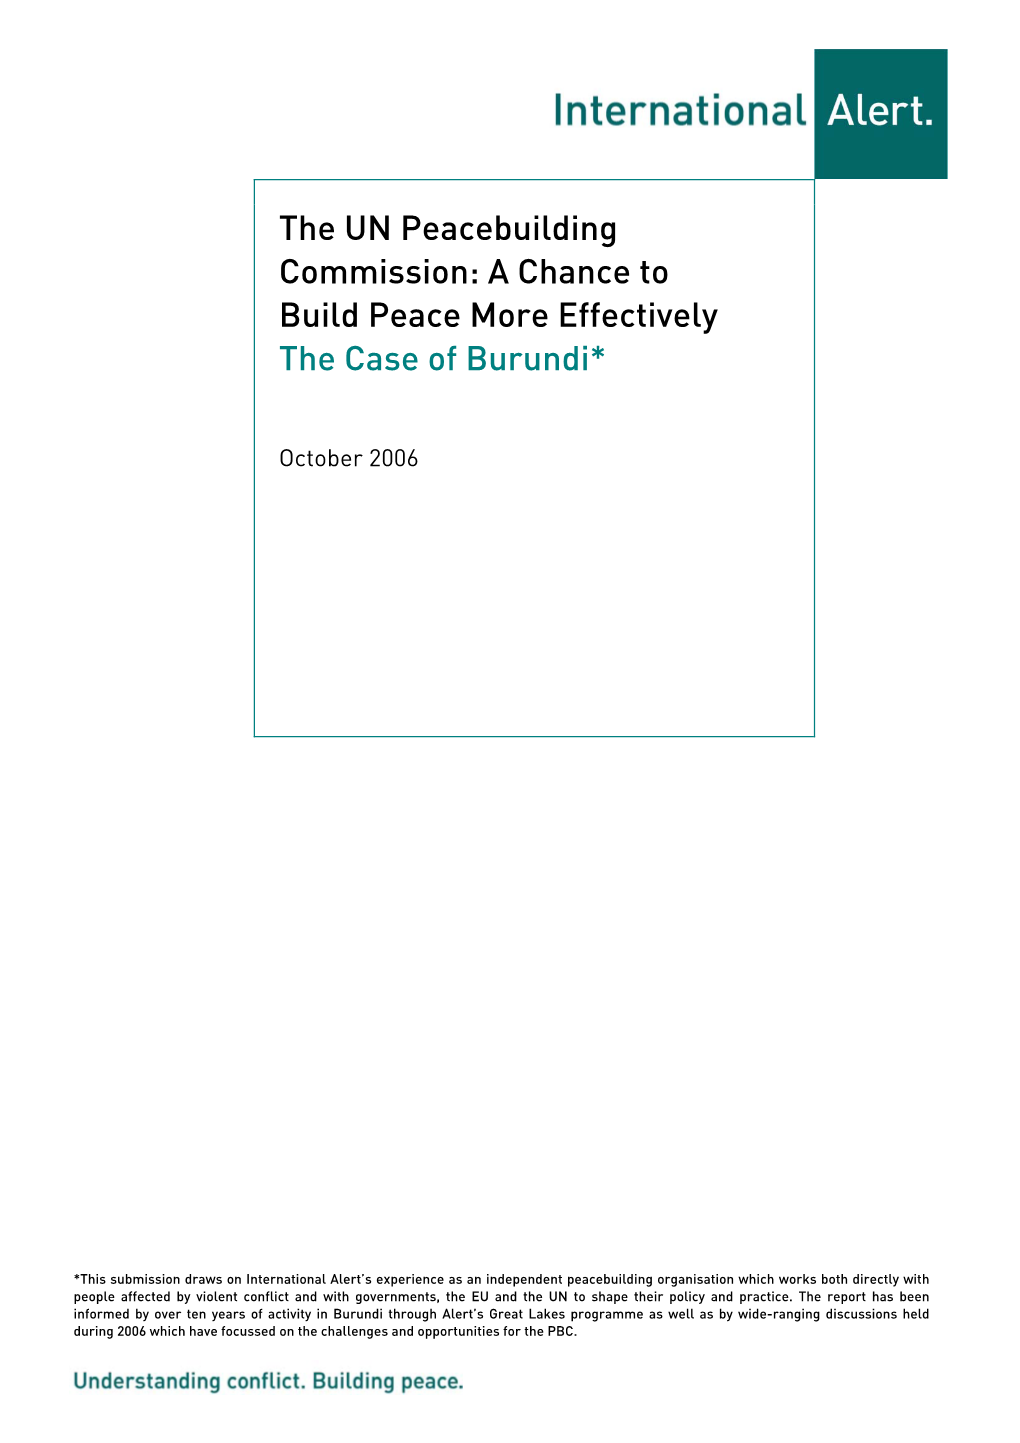 The UN Peacebuilding Commission: a Chance to Build Peace More Effectively the Case of Burundi*